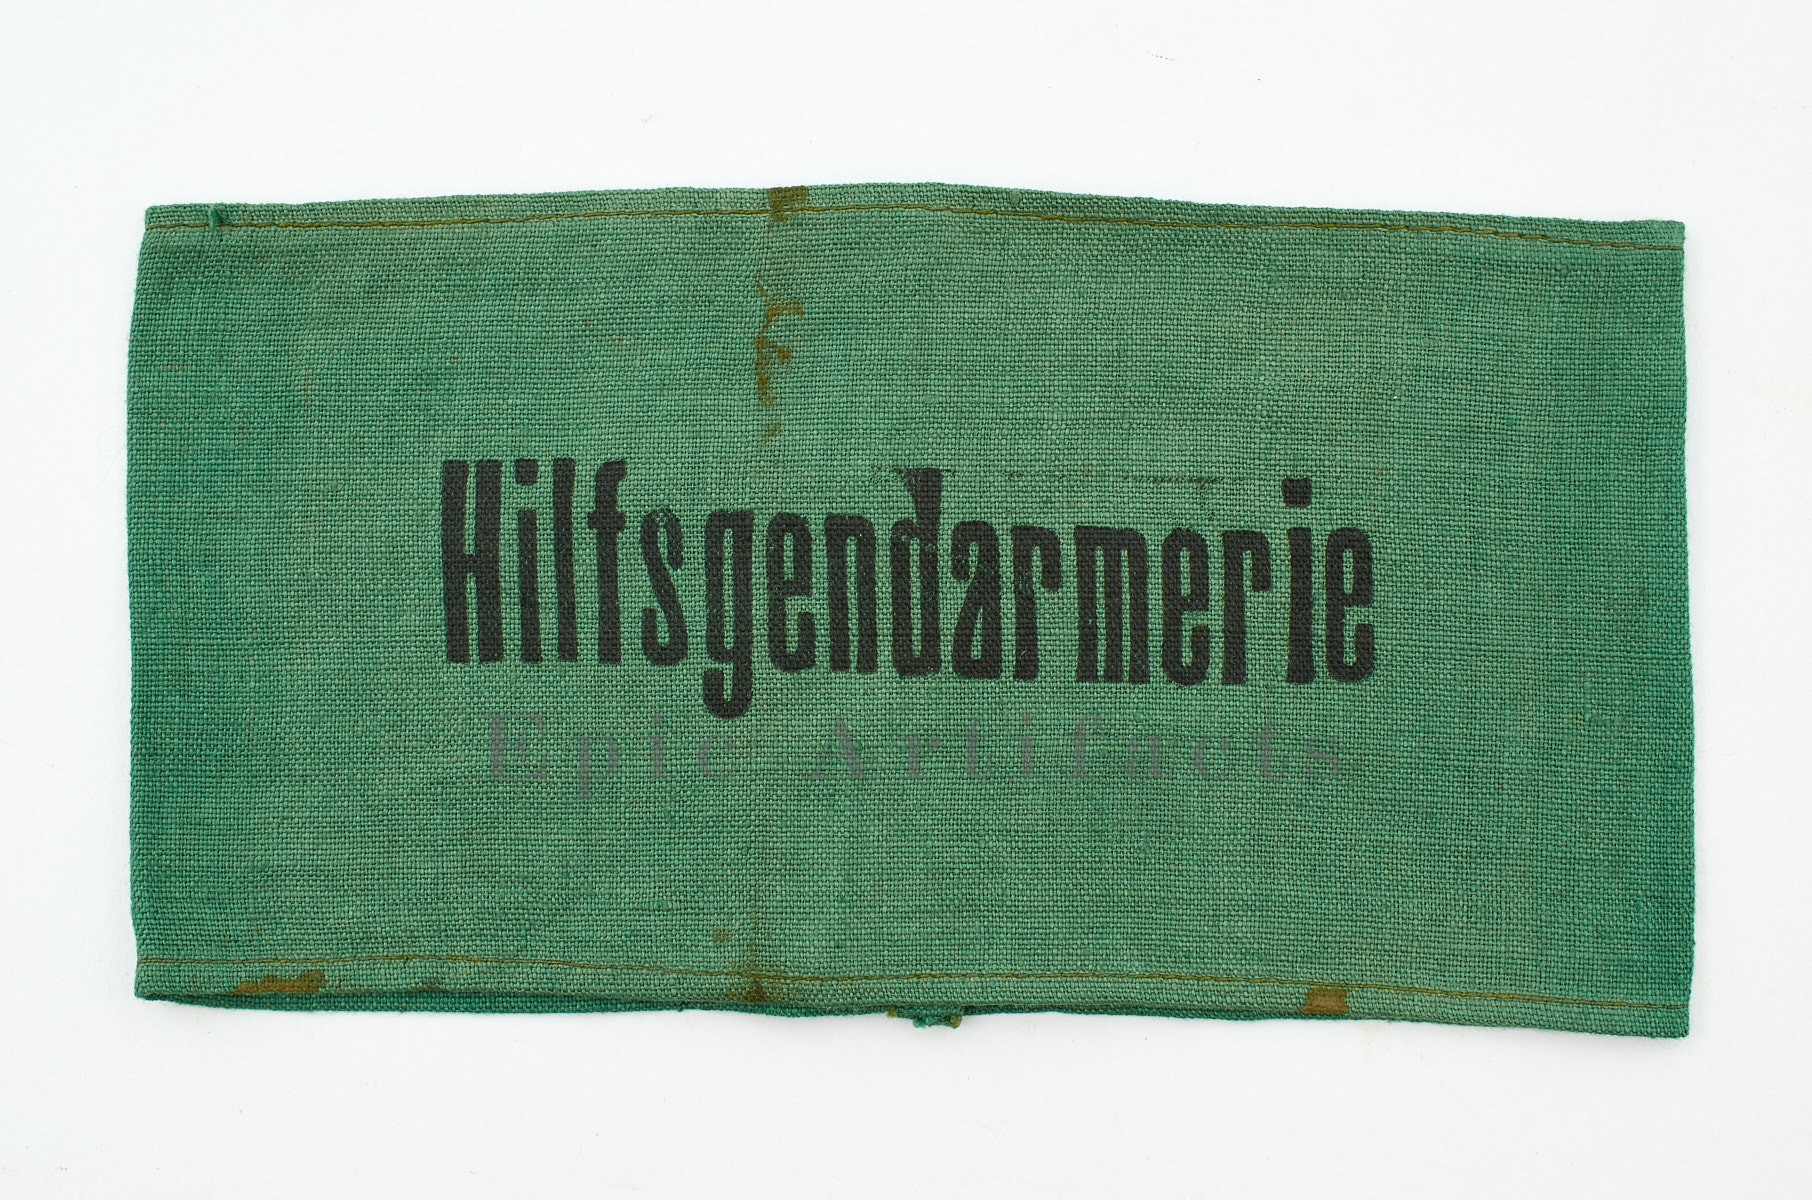 Police - Auxiliary Epic Armband Hilfsgendarmerie Artifacts